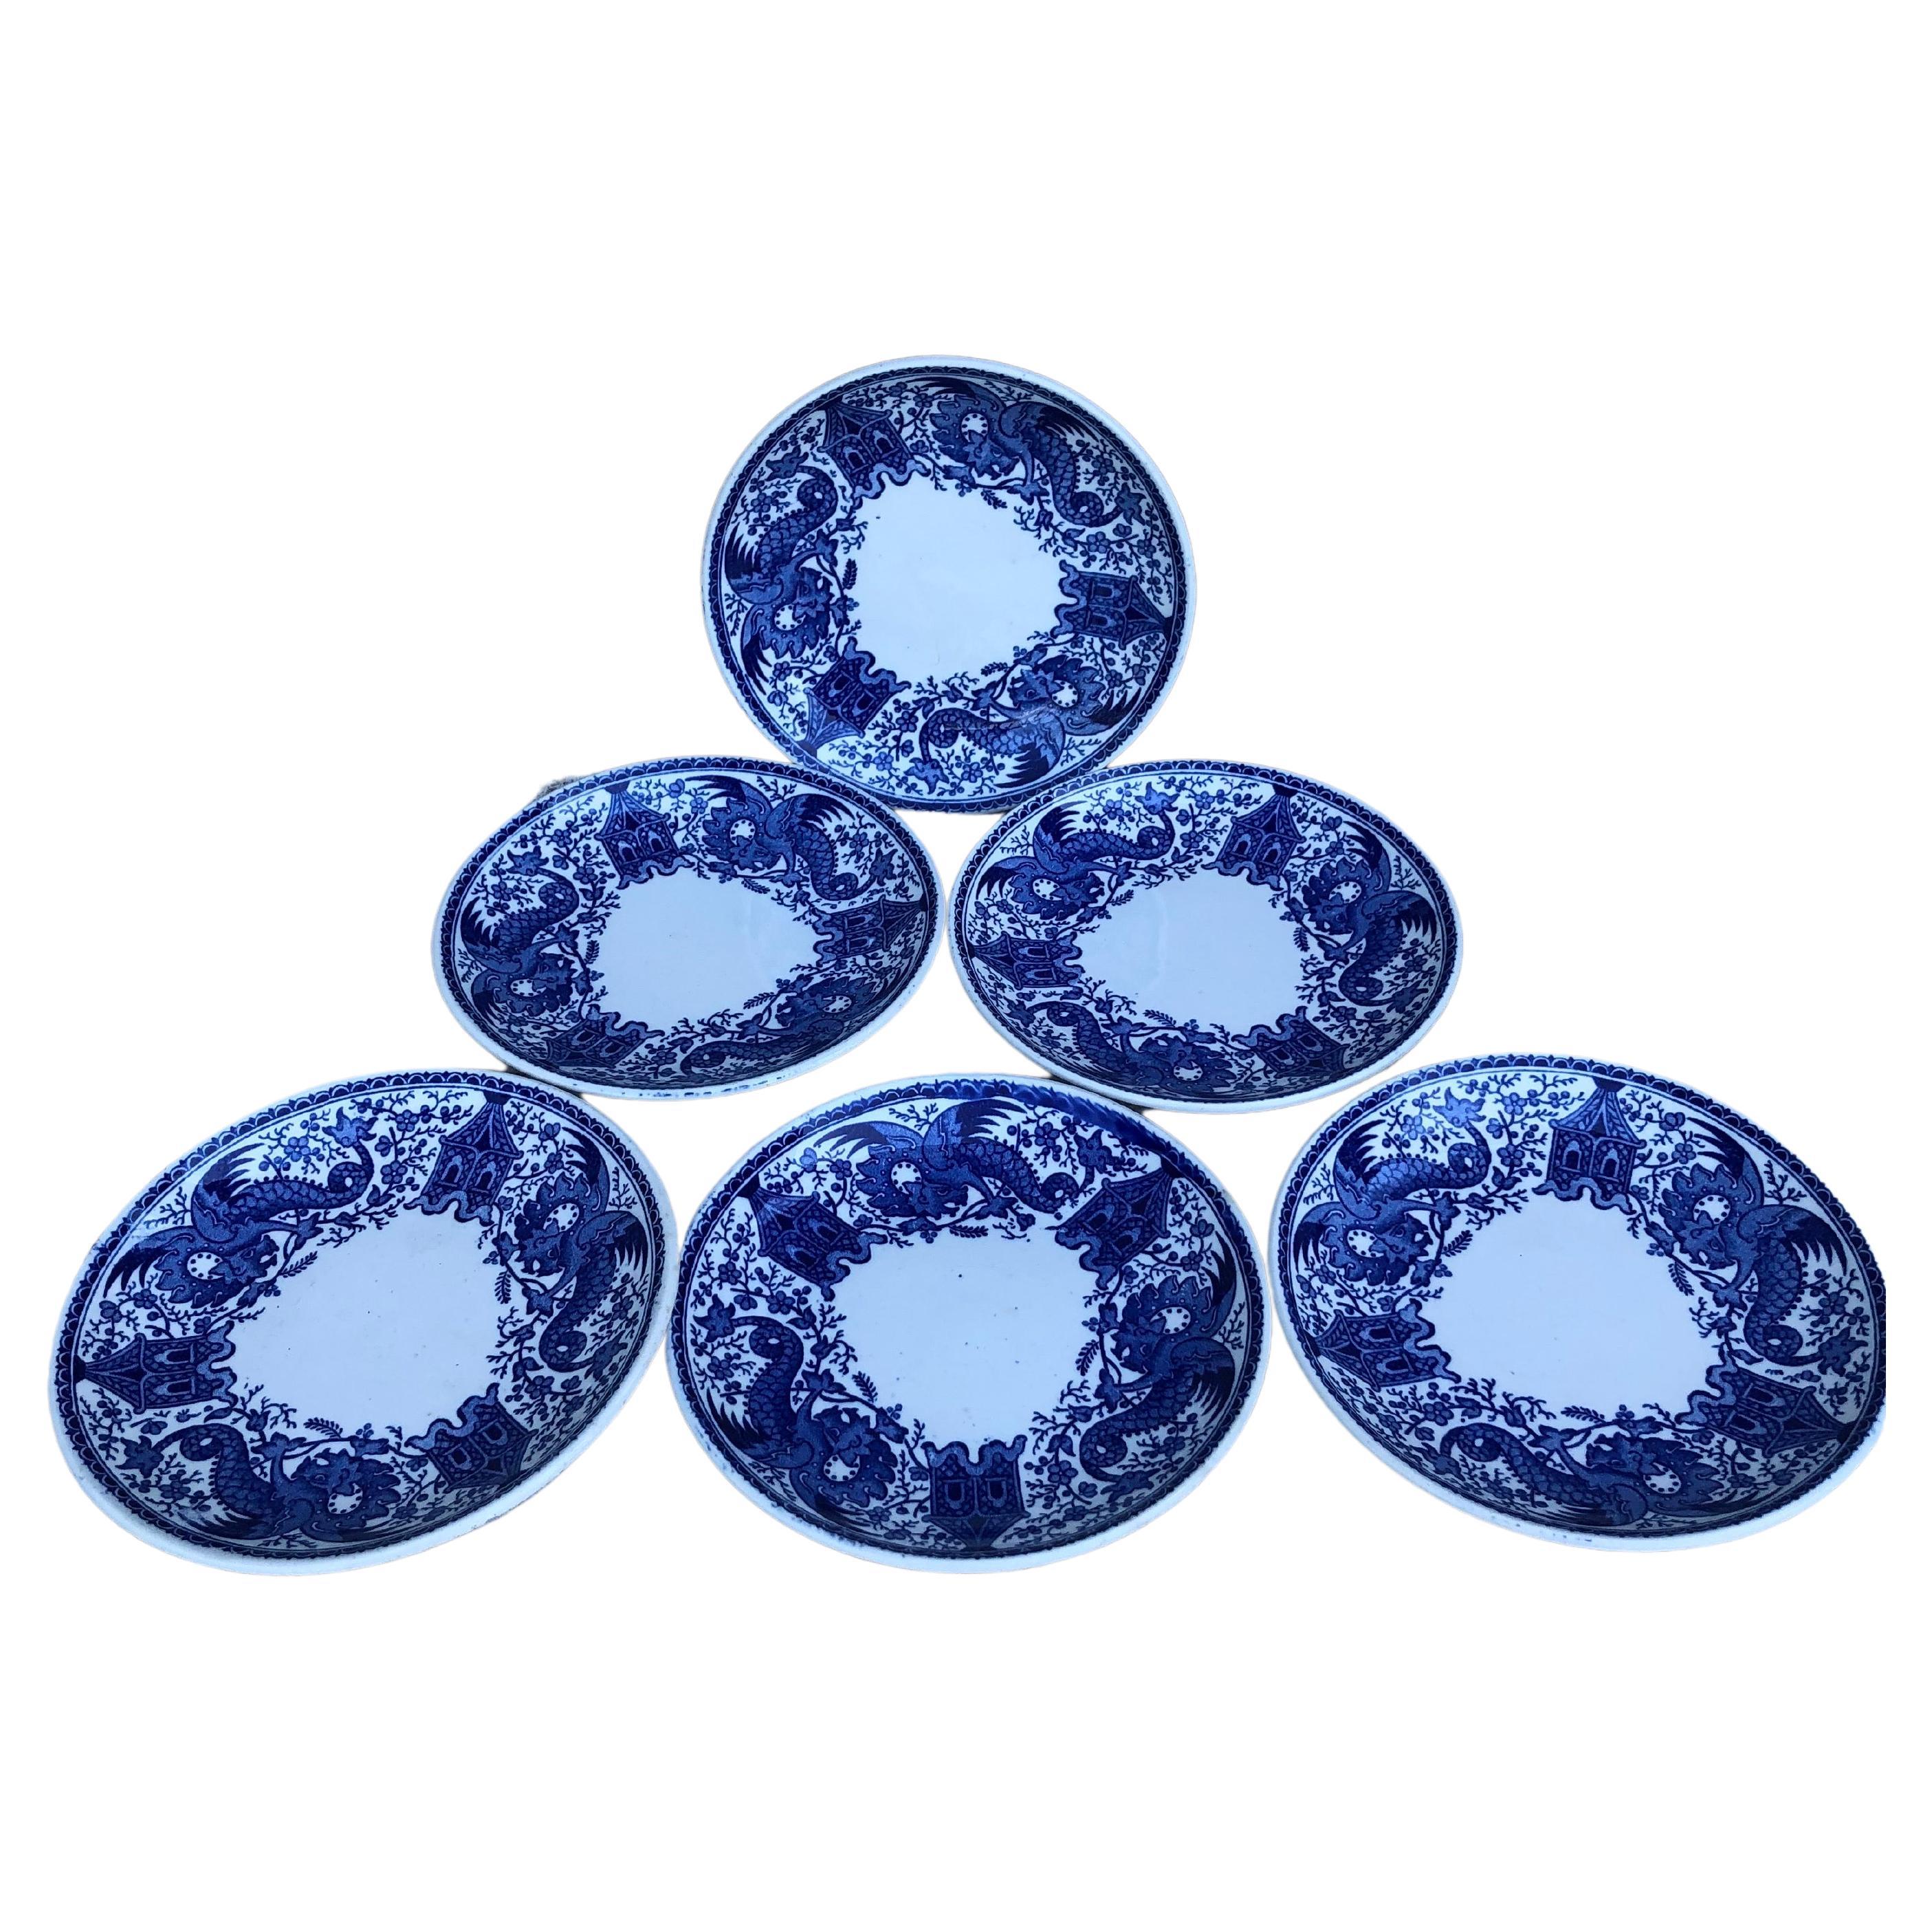 Set of 6 Small Blue & White Small Plates Dragons Sarreguemines